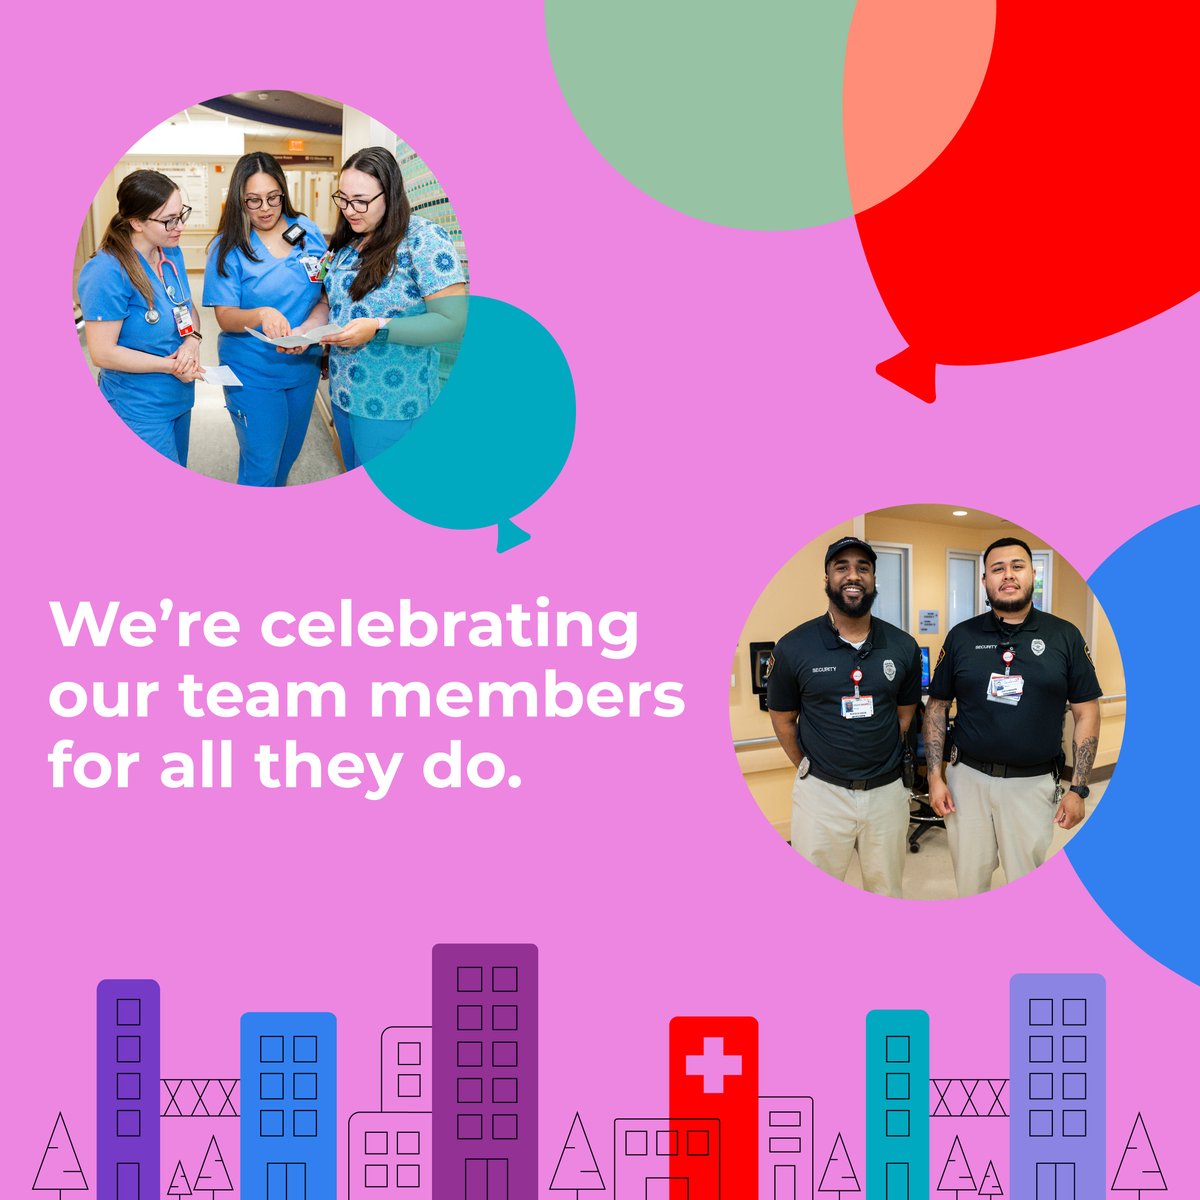 Join the celebration this #NationalHospitalWeek! Here's to our phenomenal team members and their unwavering commitment and compassion. We thank them for everything they do to make life better for children! ❤️ #IncredibleTogether #NationalHospitalWeek